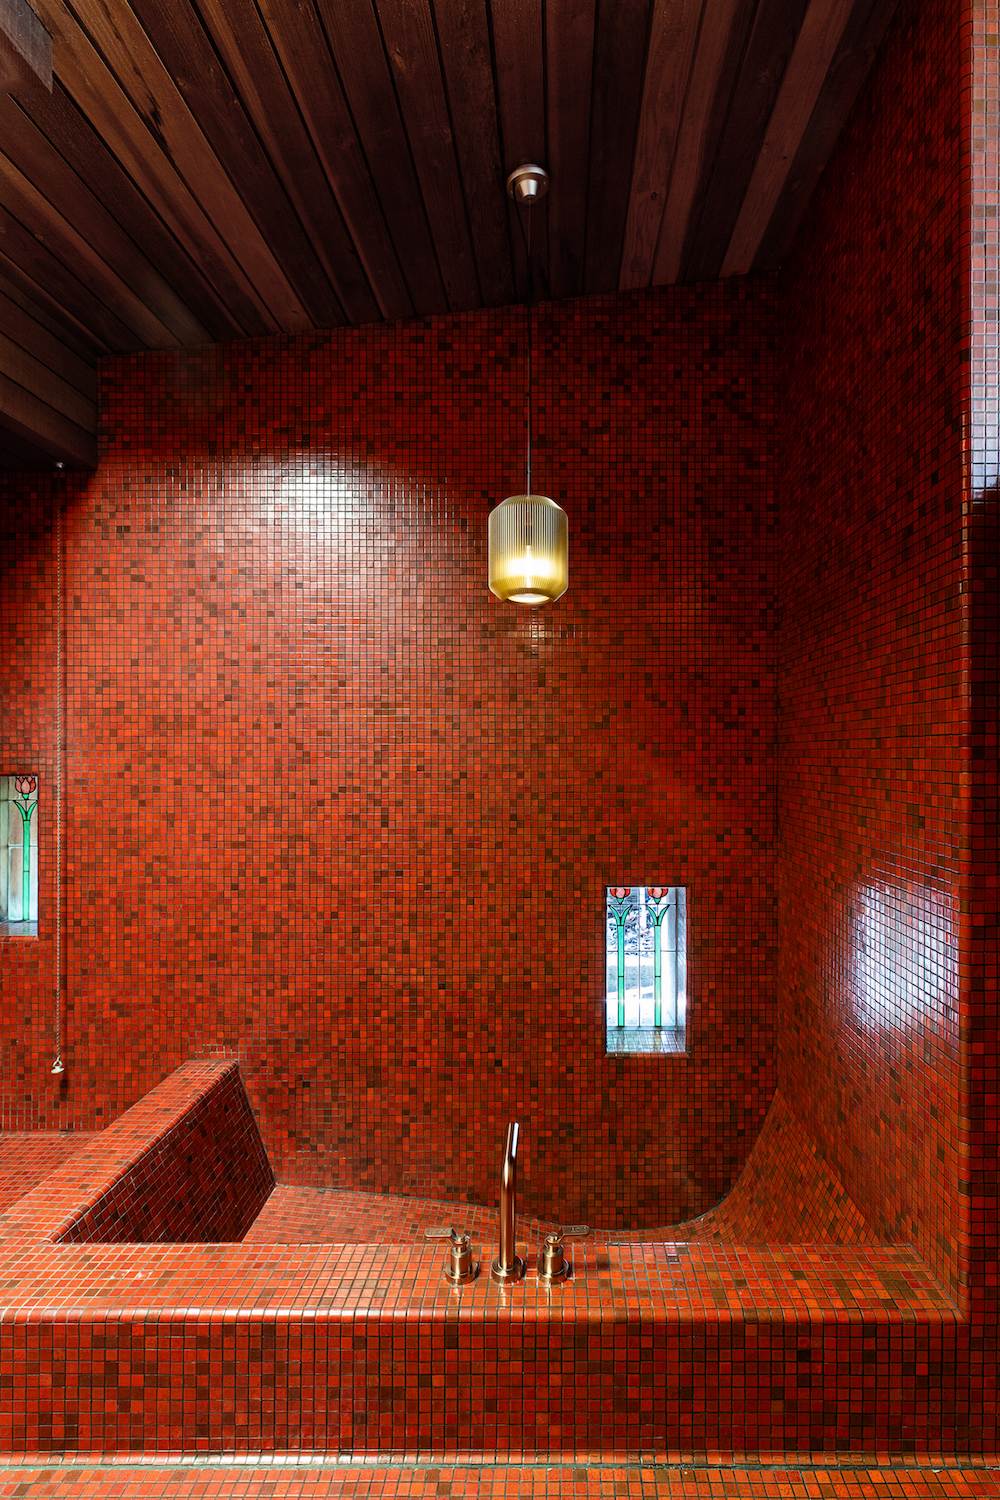 Interior of San Diego designers Paul Basile and Jules Wilson's La Jolla home designed by Frederick Charles Liebhardt featuring a red tile bathtub